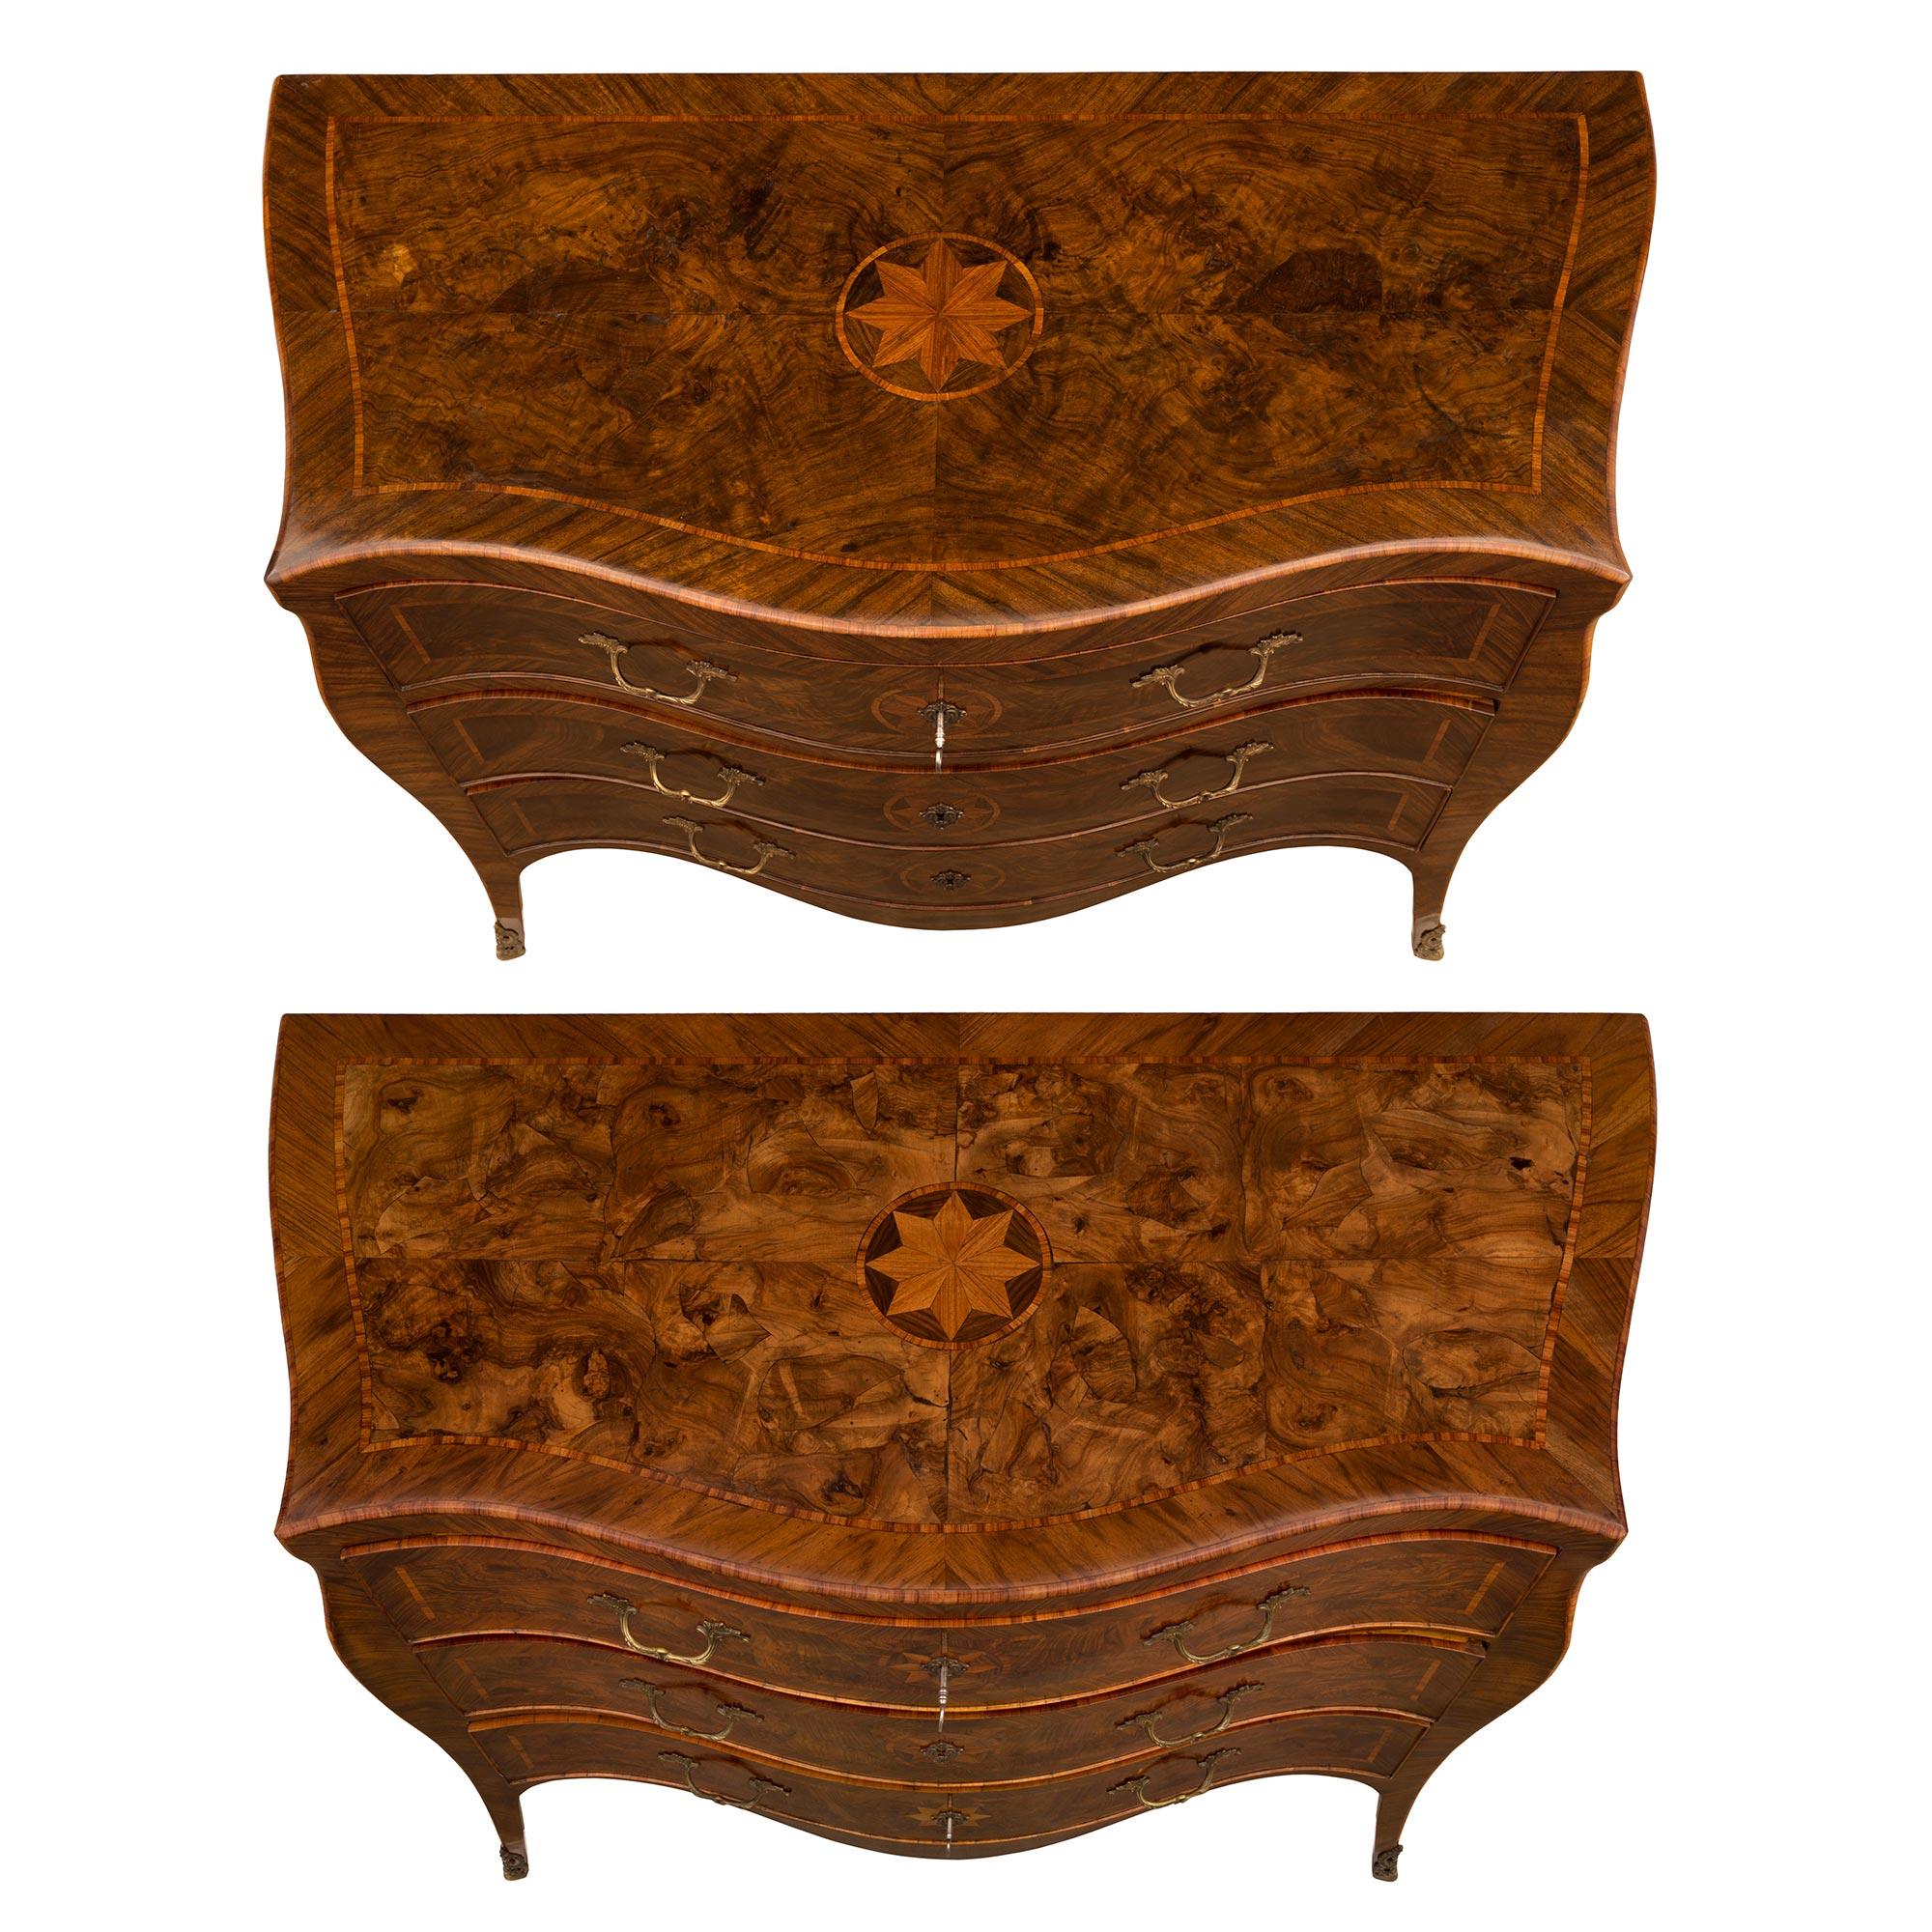 An exquisite his and hers pair of Italian 18th century Louis XV period Walnut and patinated bronze commodes. Each three drawer chest is raised by elegant lightly curved legs with fine pierced bronze foliate sabots below the most decorative arbalest